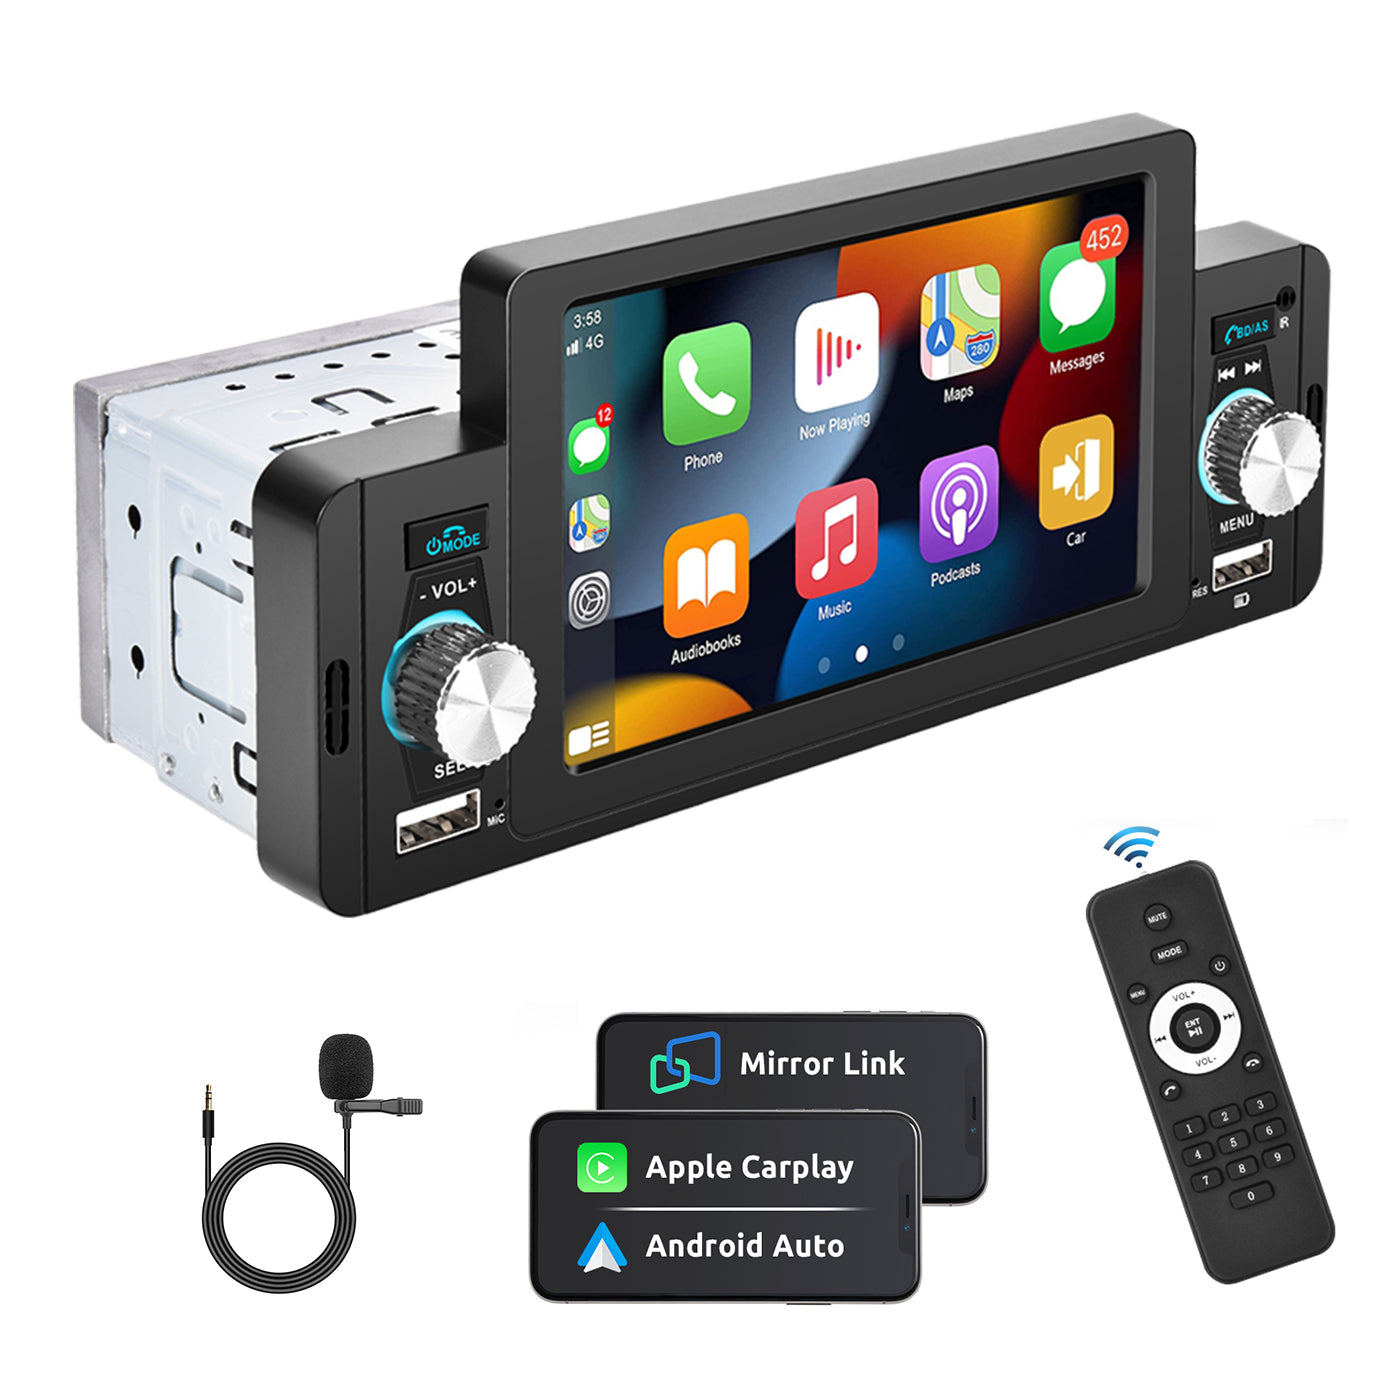  Podofo Single Din Car Stereo with Bluetooth, 5.1 Inch  Touchscreen Car Radio with Backup Camera, Voice Control, AM/FM Radio,  TF/USB/AUX-in, SWC, Microphone, Remote Control, Mirror Link : Electronics